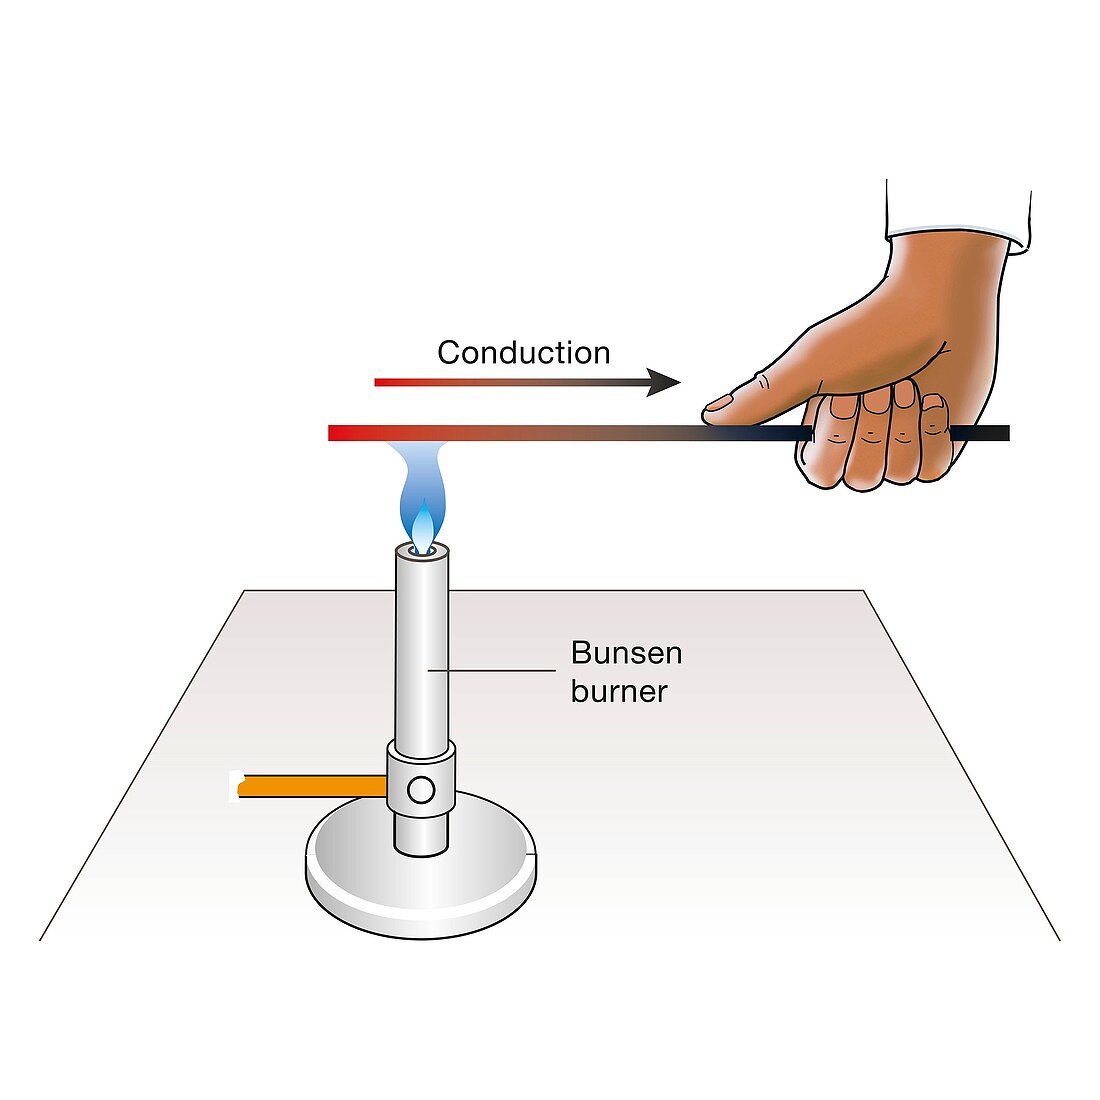 Thermal conduction in a metal, illustration